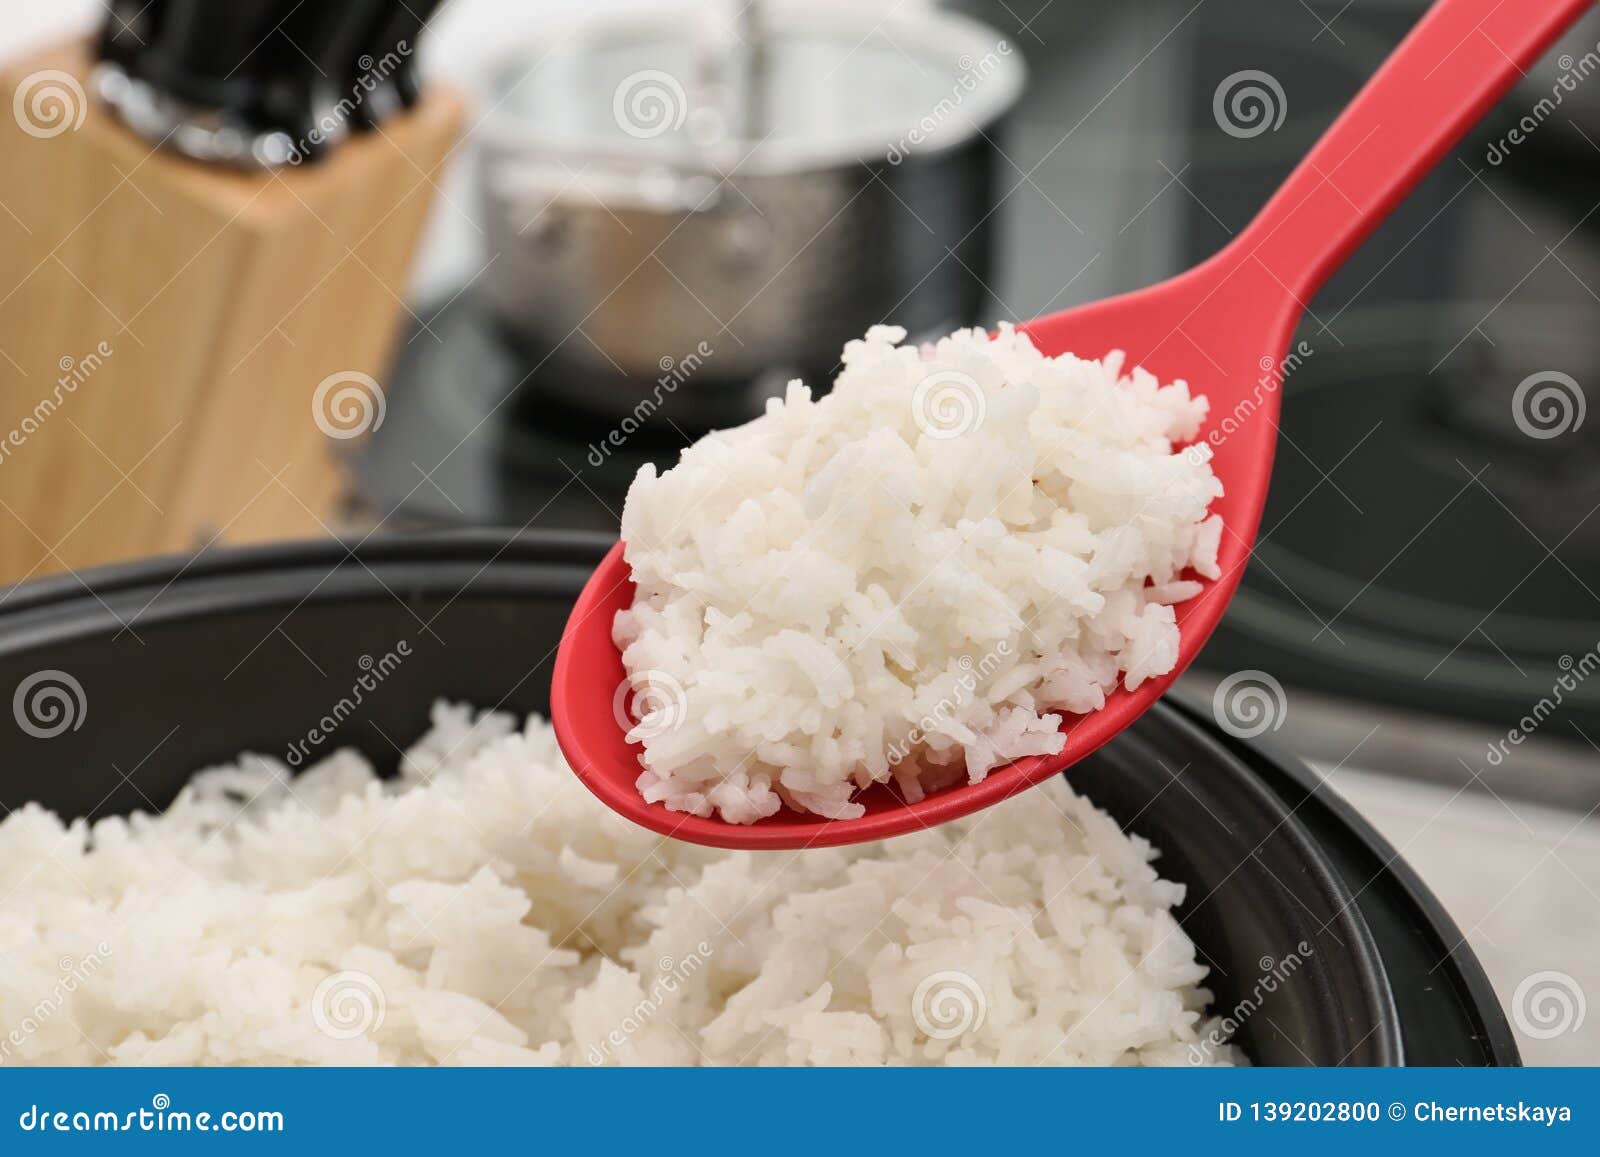 Rice steam or boil фото 21